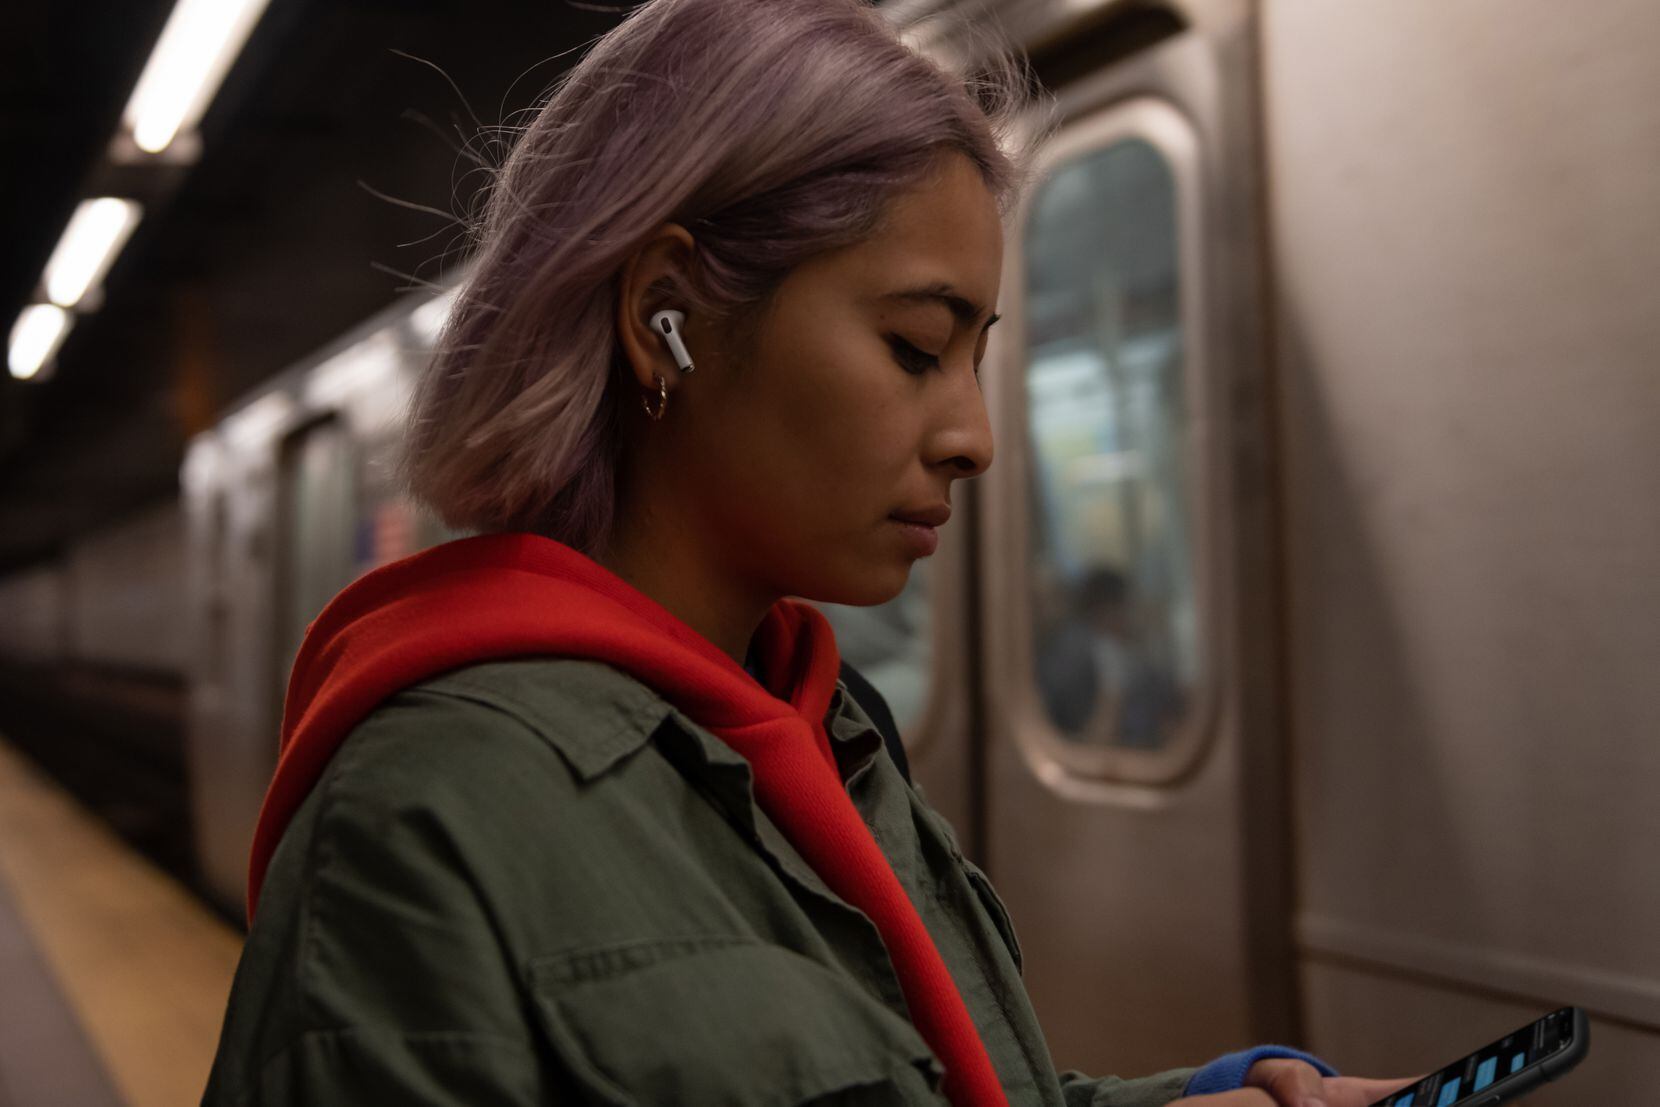 AirPods Pro don't hang as low from your ear as the original AirPods do.